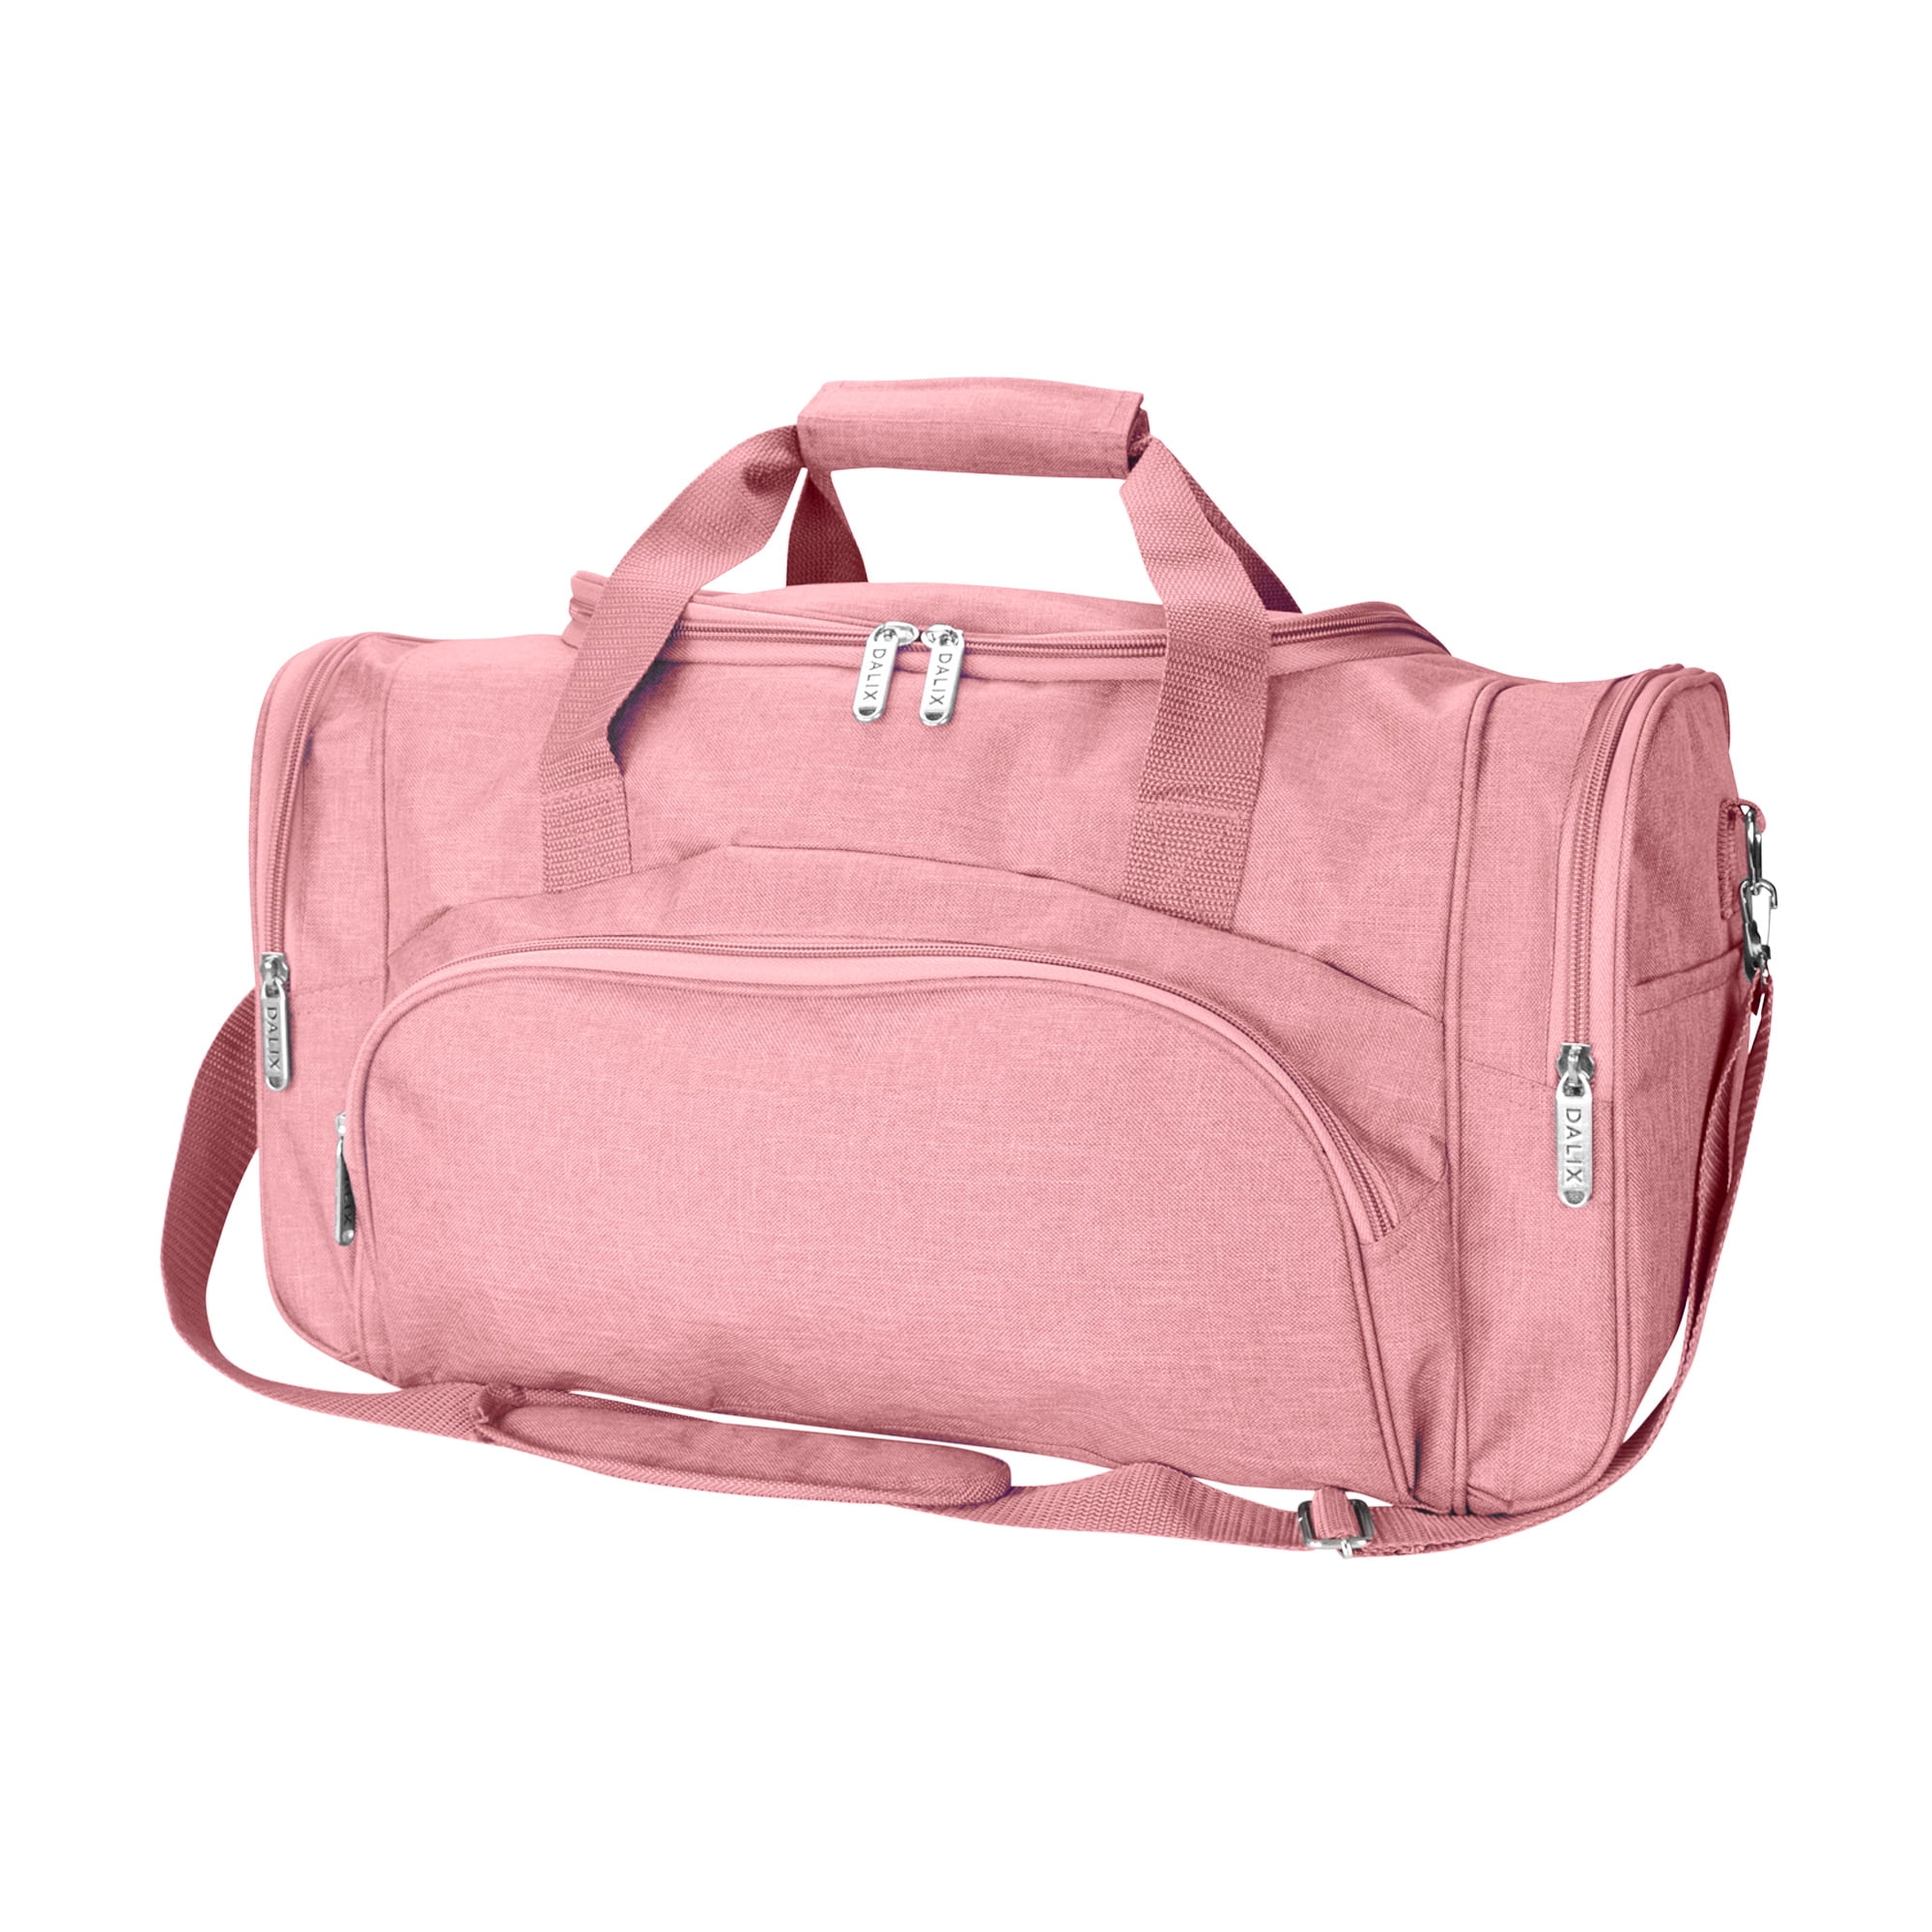 Kysaxnun Small Pink Gym Travel Duffle Bag for Women India | Ubuy